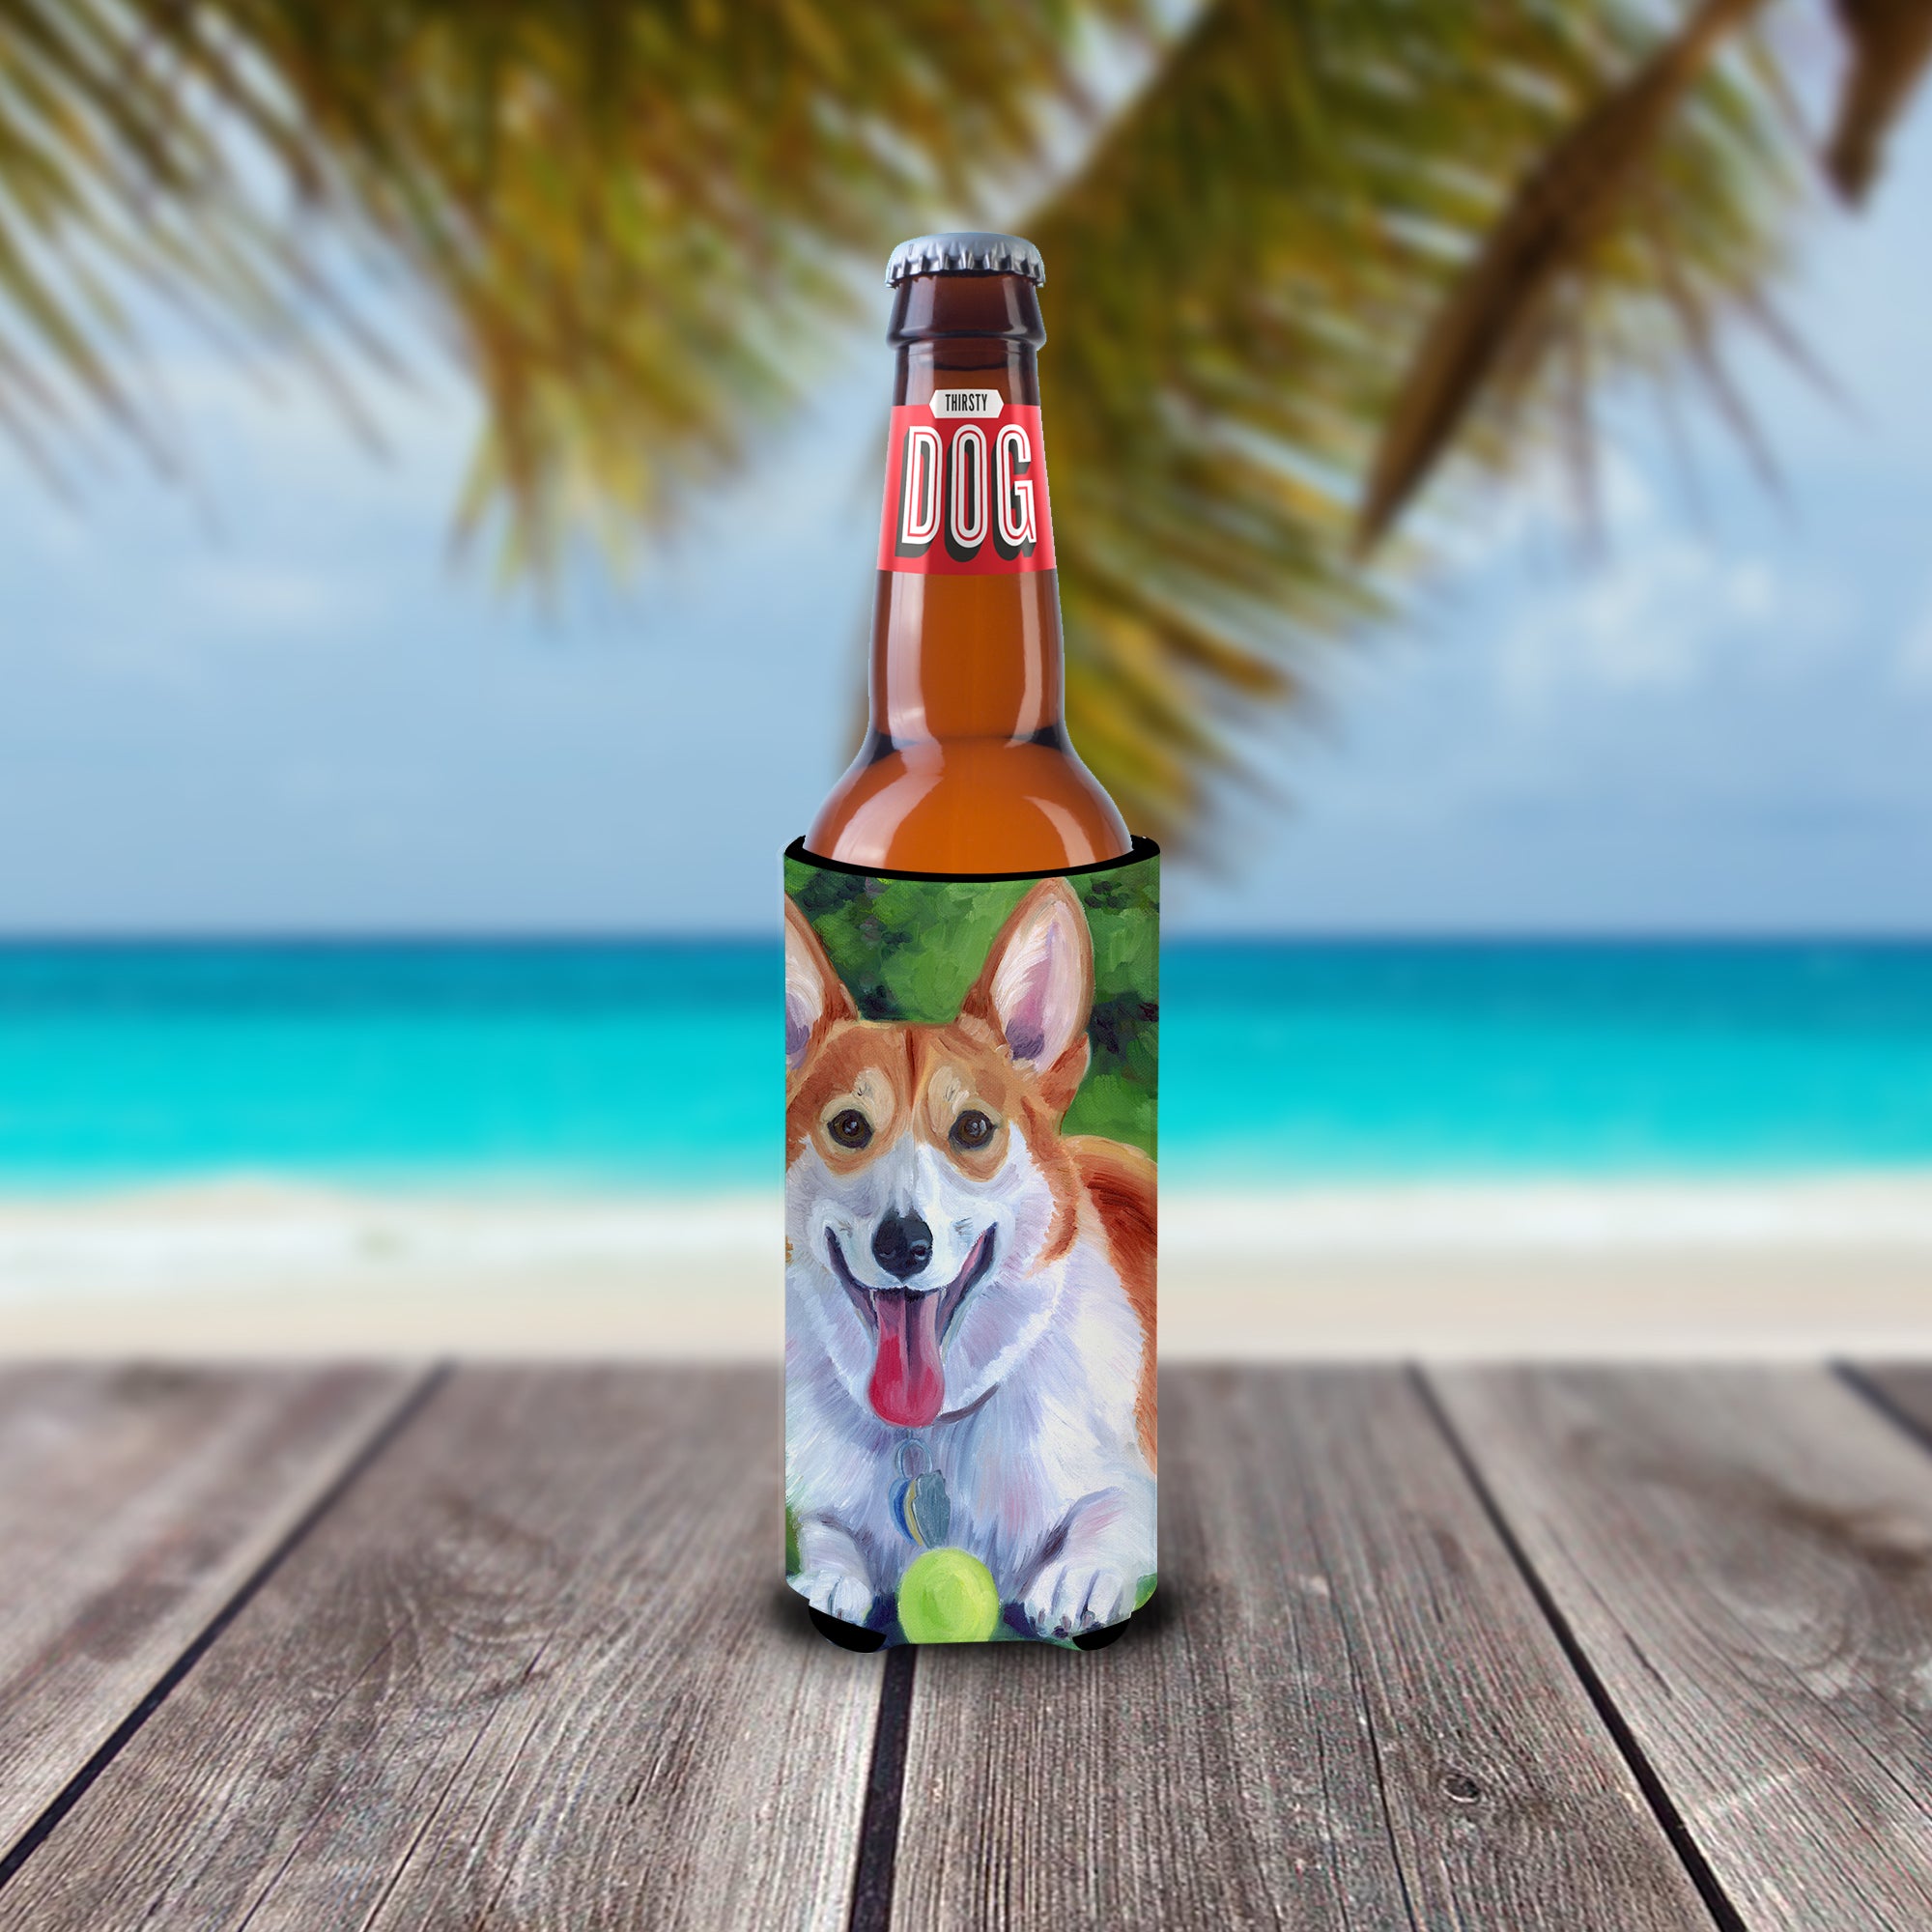 Corgi with green ball Ultra Beverage Insulators for slim cans 7296MUK.